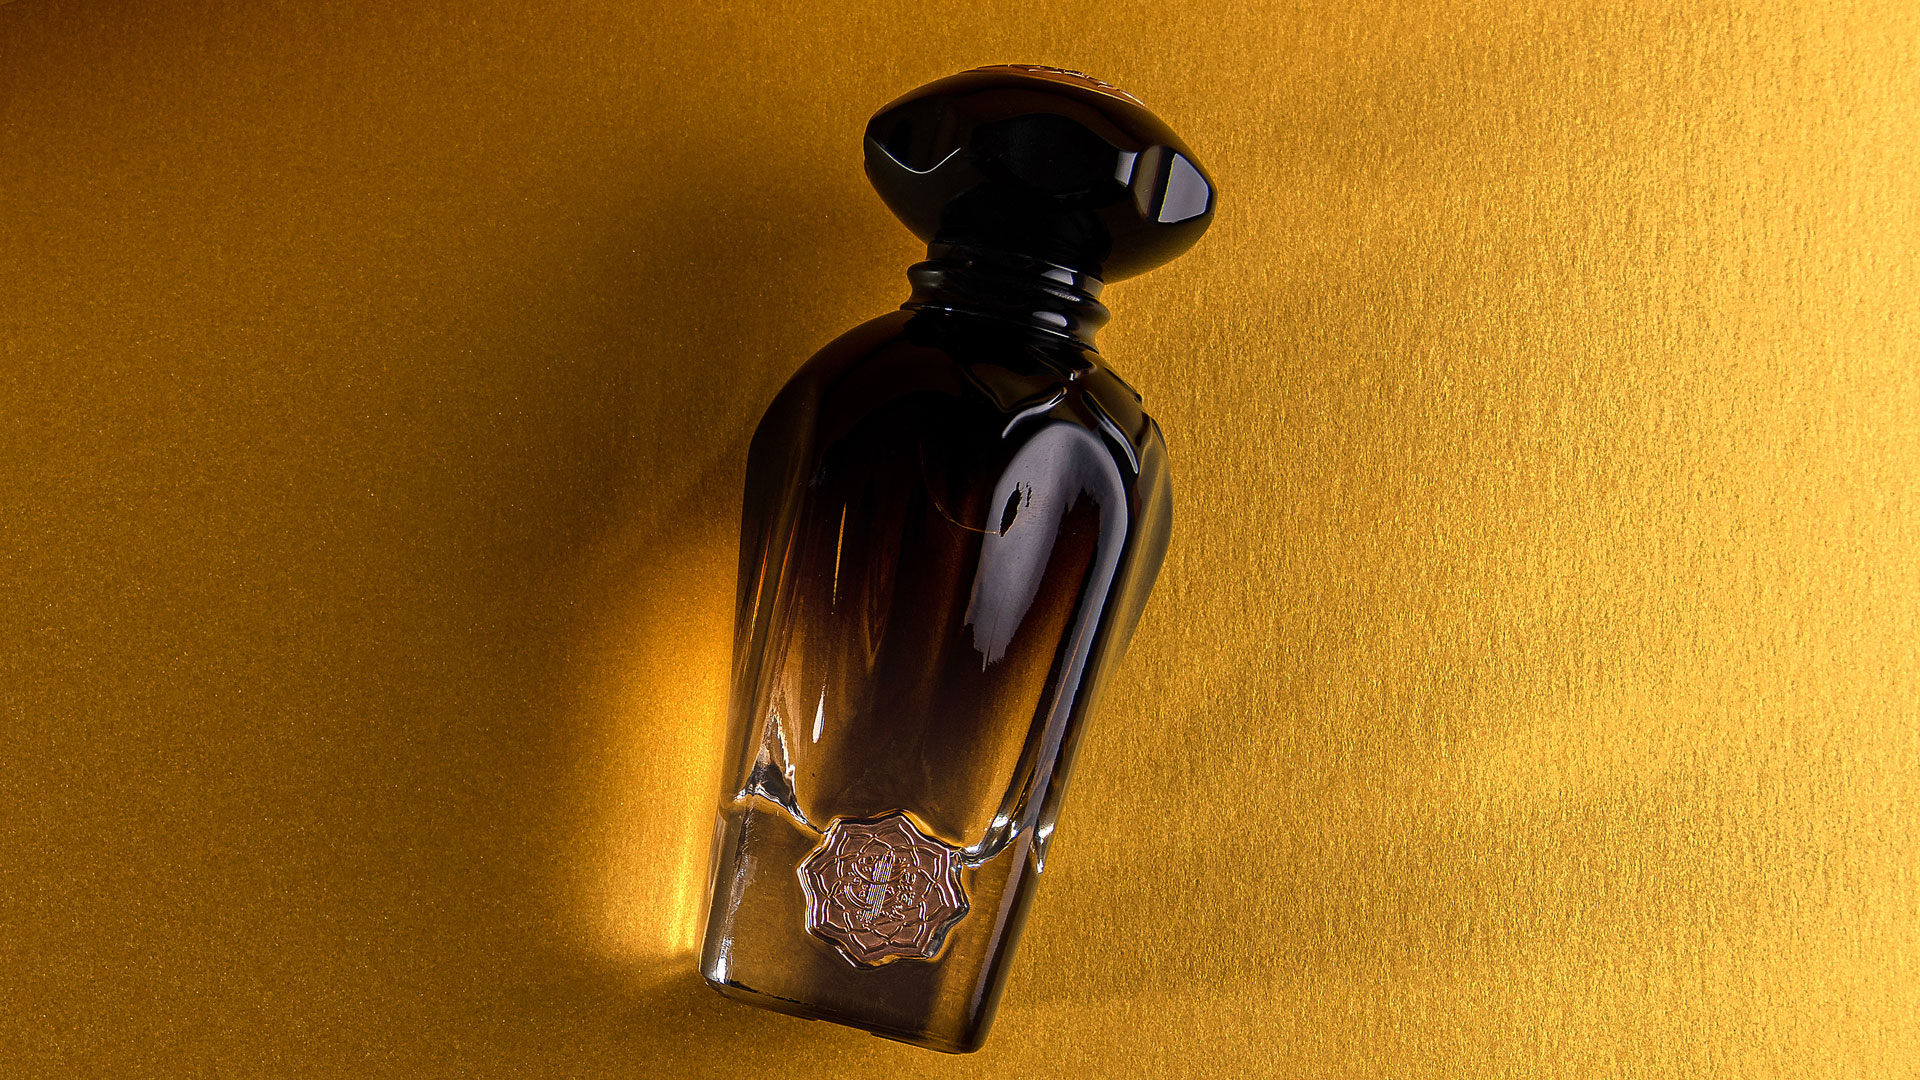 A whiff that says welcome to Cartier. Discover the Signature Scent